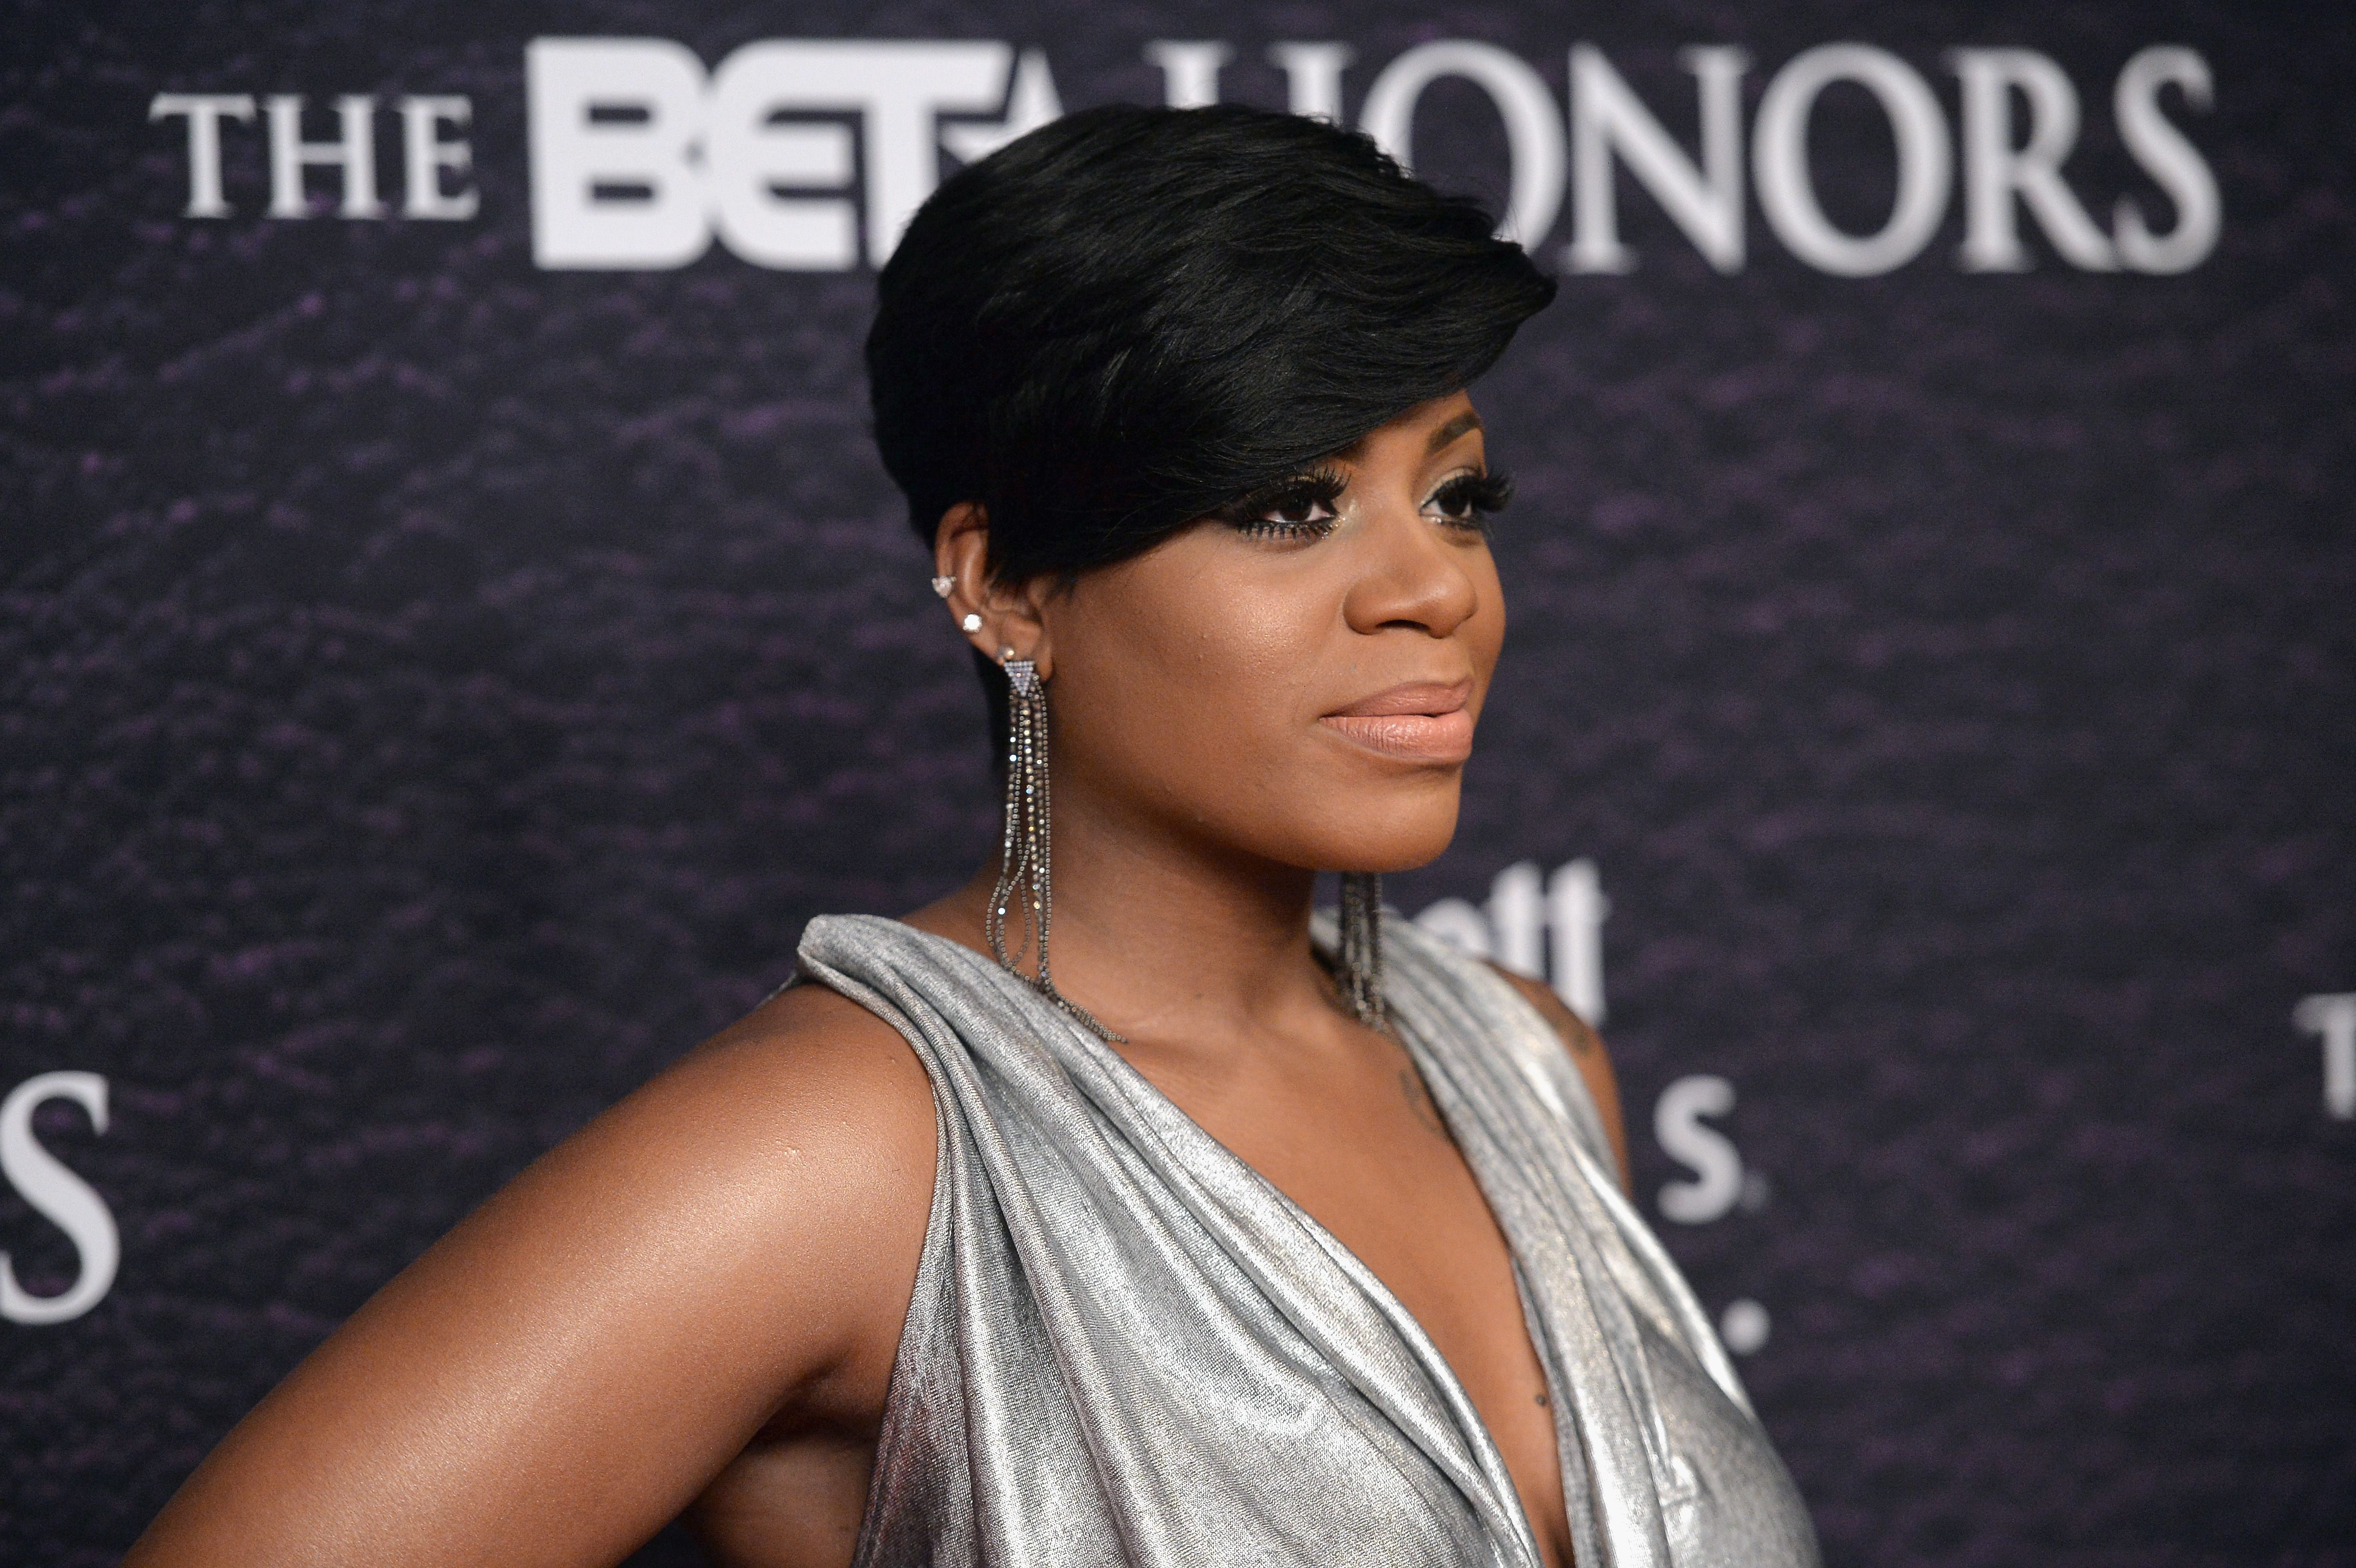 Fantasia Barrino arrives at the BET Honors Awards in 2016 in Washington, DC. | Photo: Getty Images